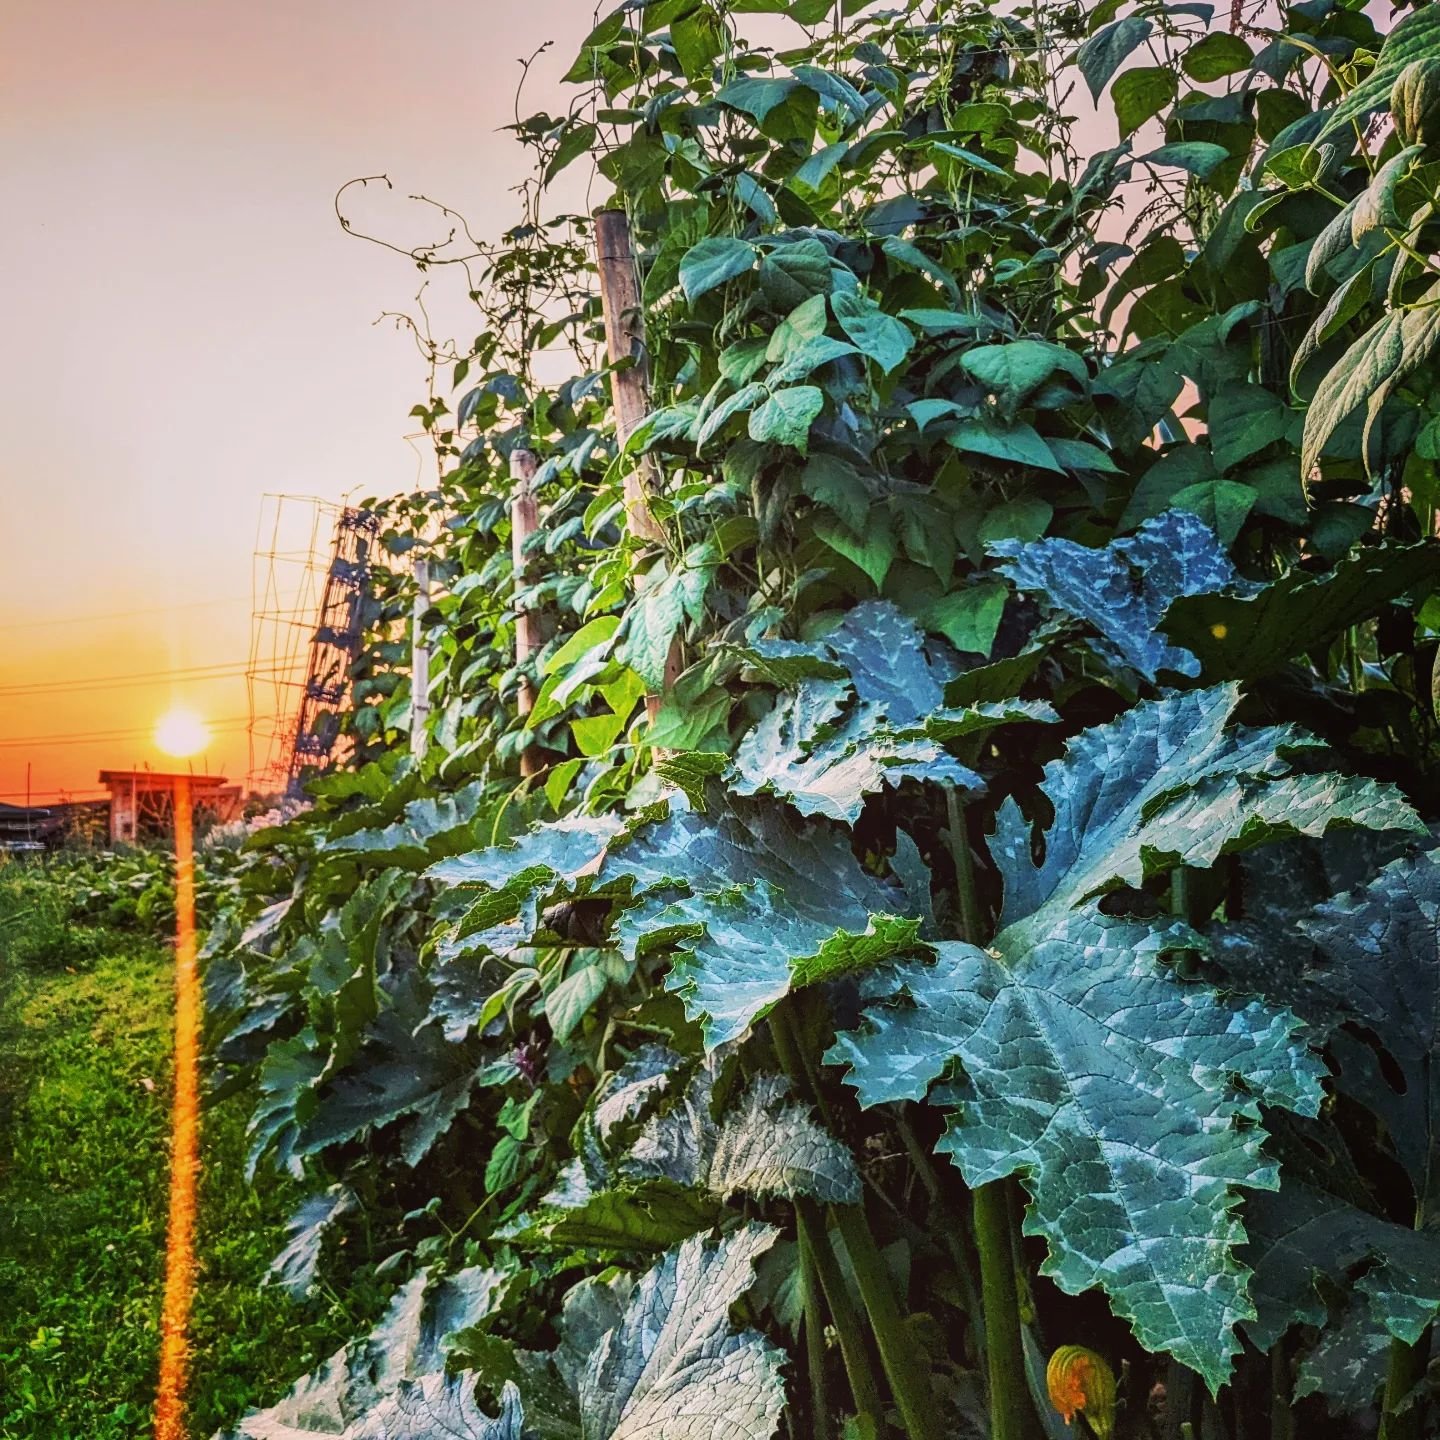 Three sisters at Sunset
Maize, beans and courgettes/pumpkins all supporting each other in one way or another. 
I love what a jungle they always make.

#threesisters 
#permaculture
#permakulture 
#naturalshade
#savewater 
#gardenjungle🌲🌱🌼🌿